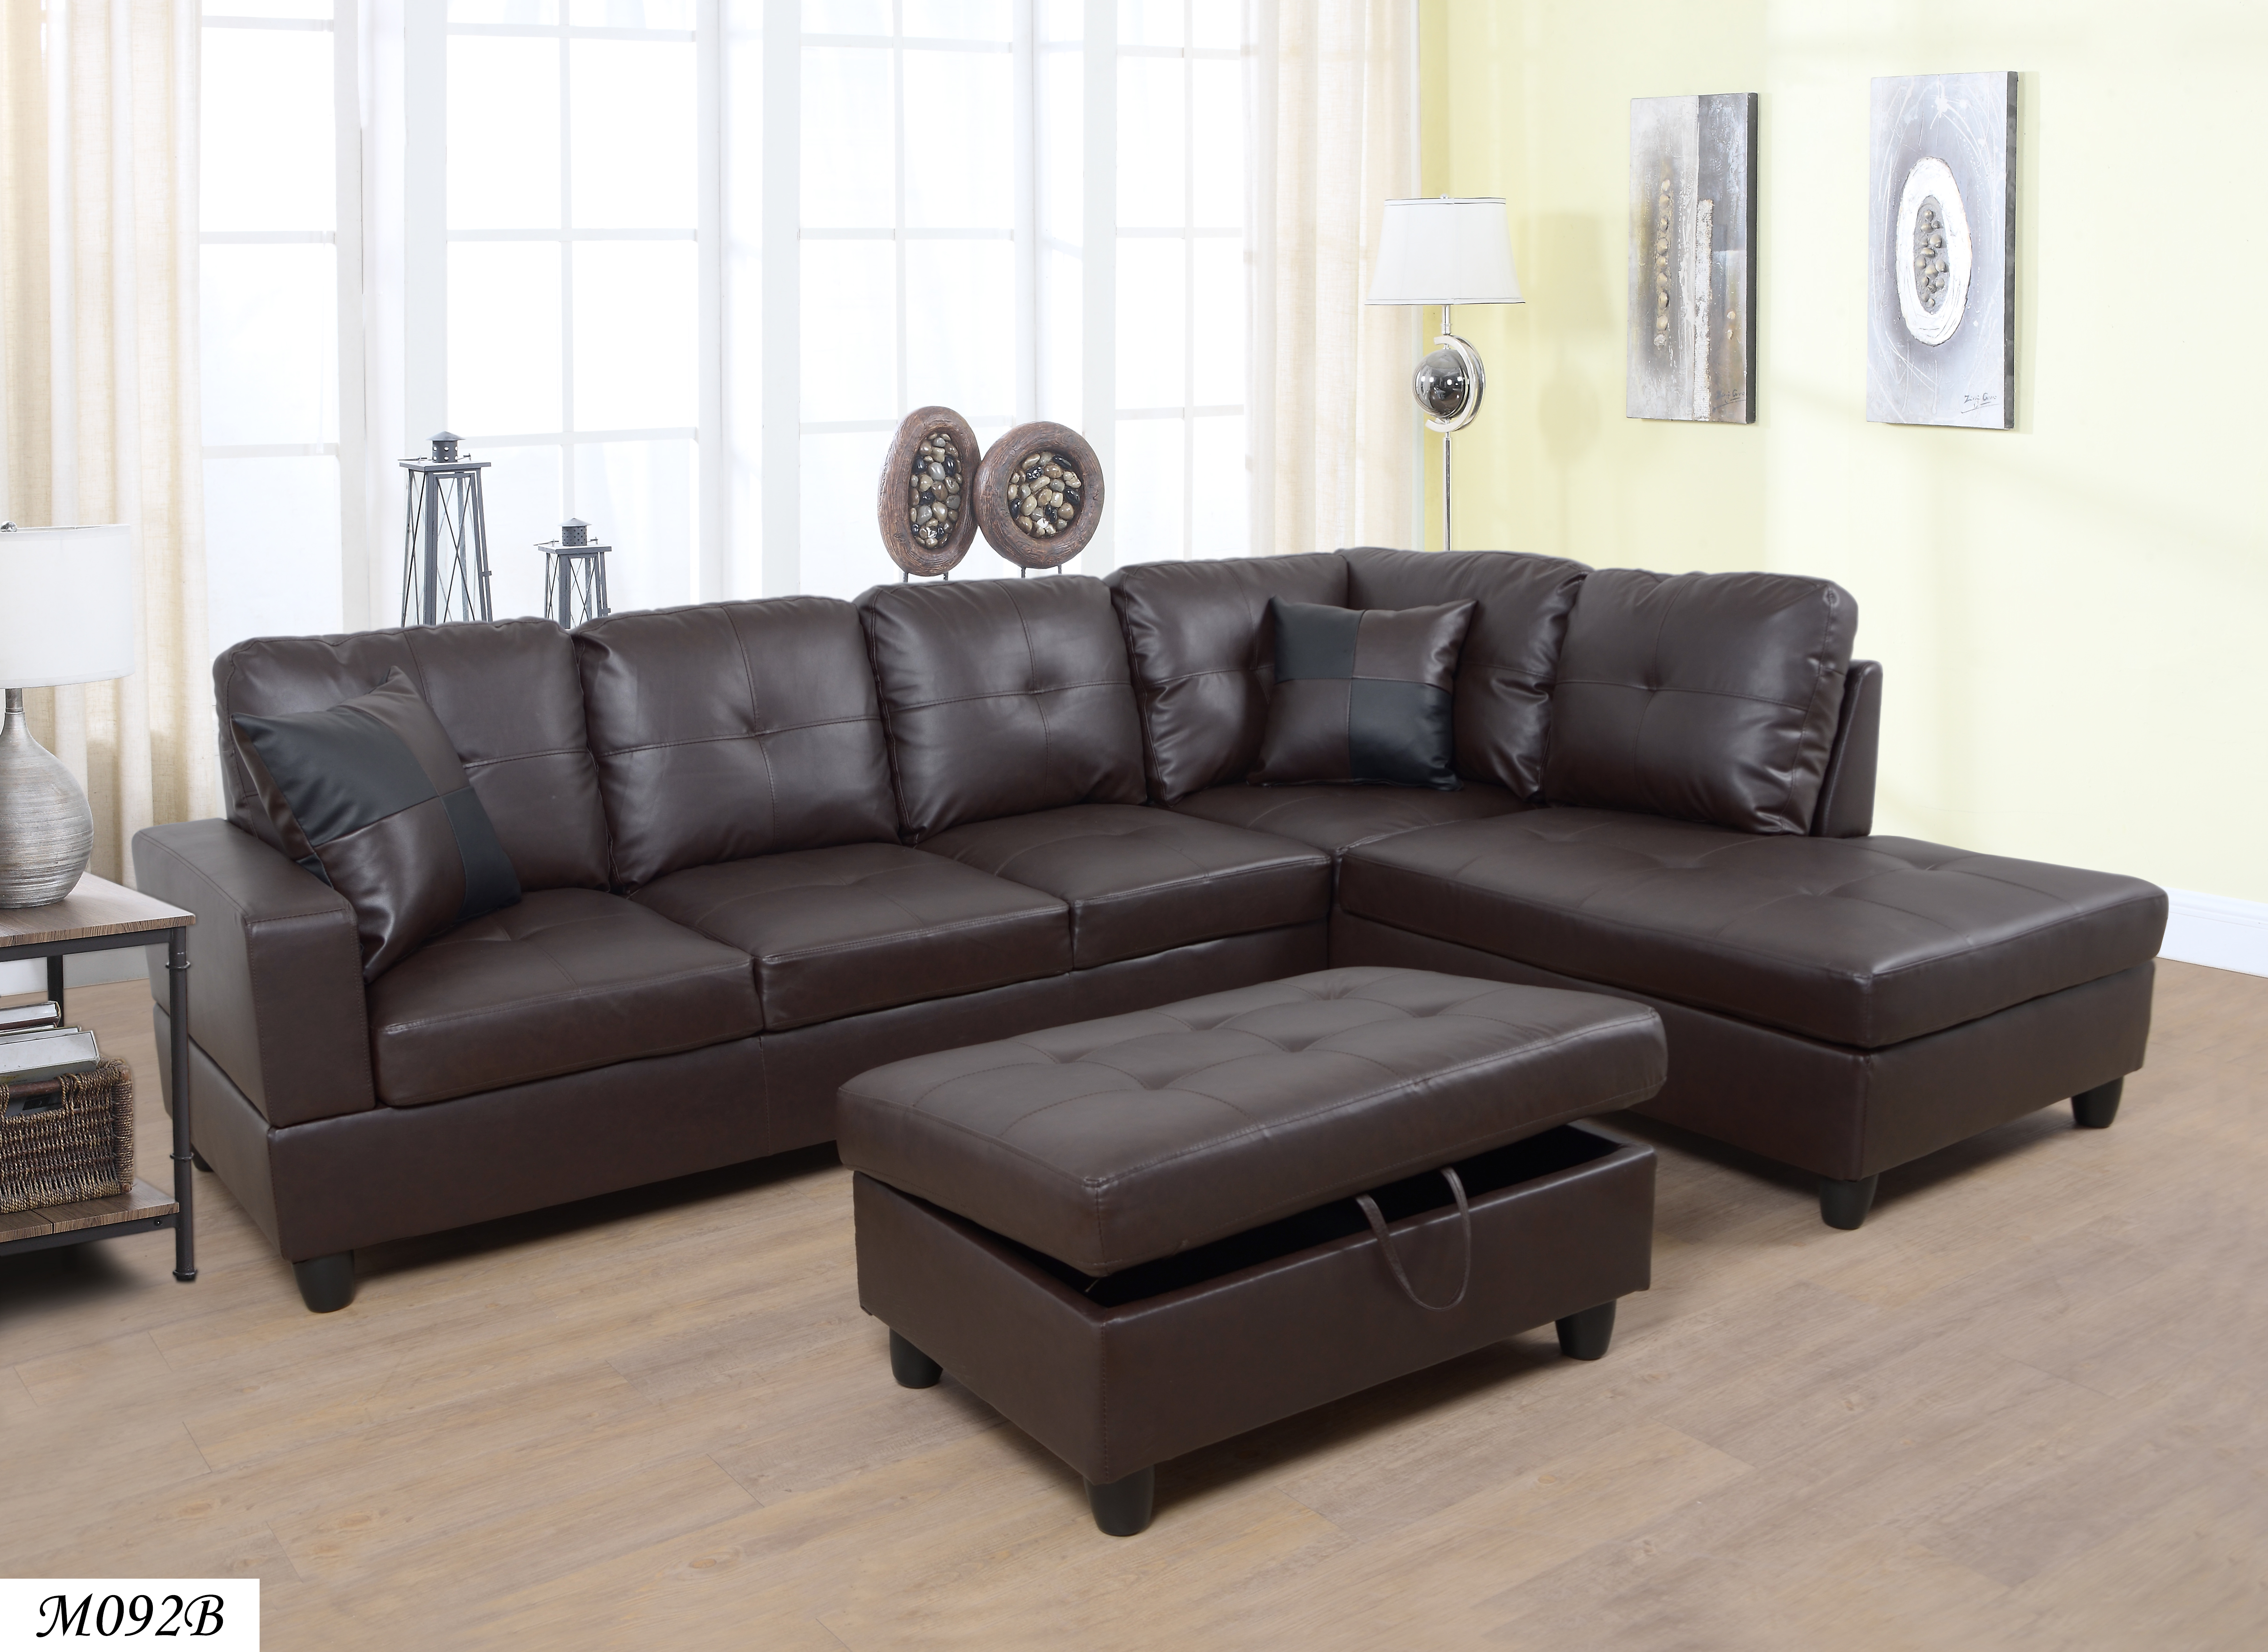 3 PC Sectional Sofa Set, (Brown) Faux Leather Right -Facing Chaise with Free Storage Ottoman-CASAINC